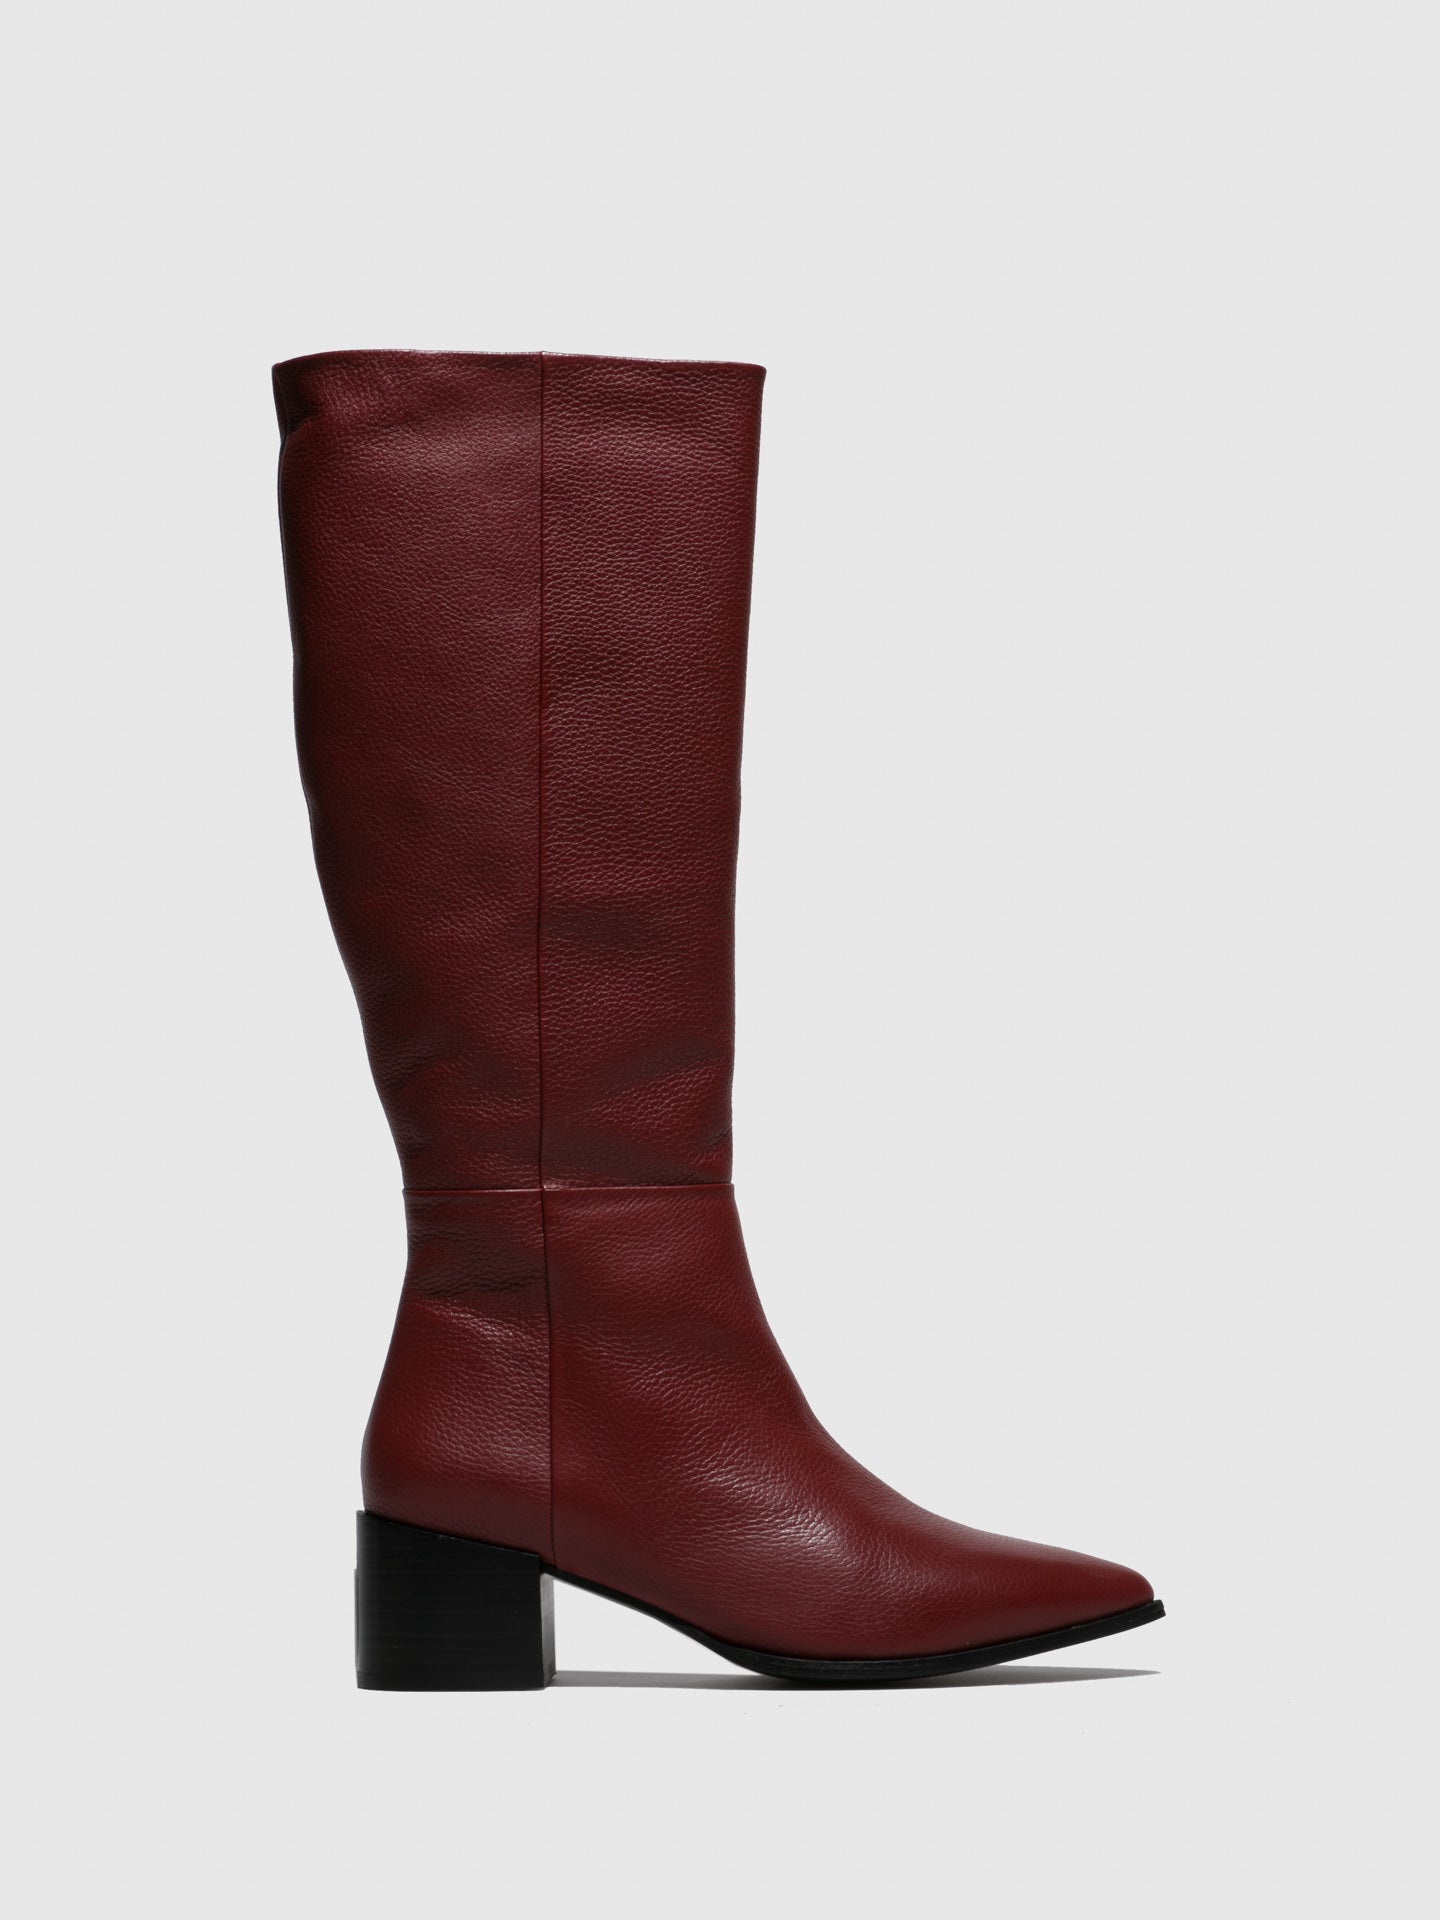 JJ Heitor Red Knee-High Boots